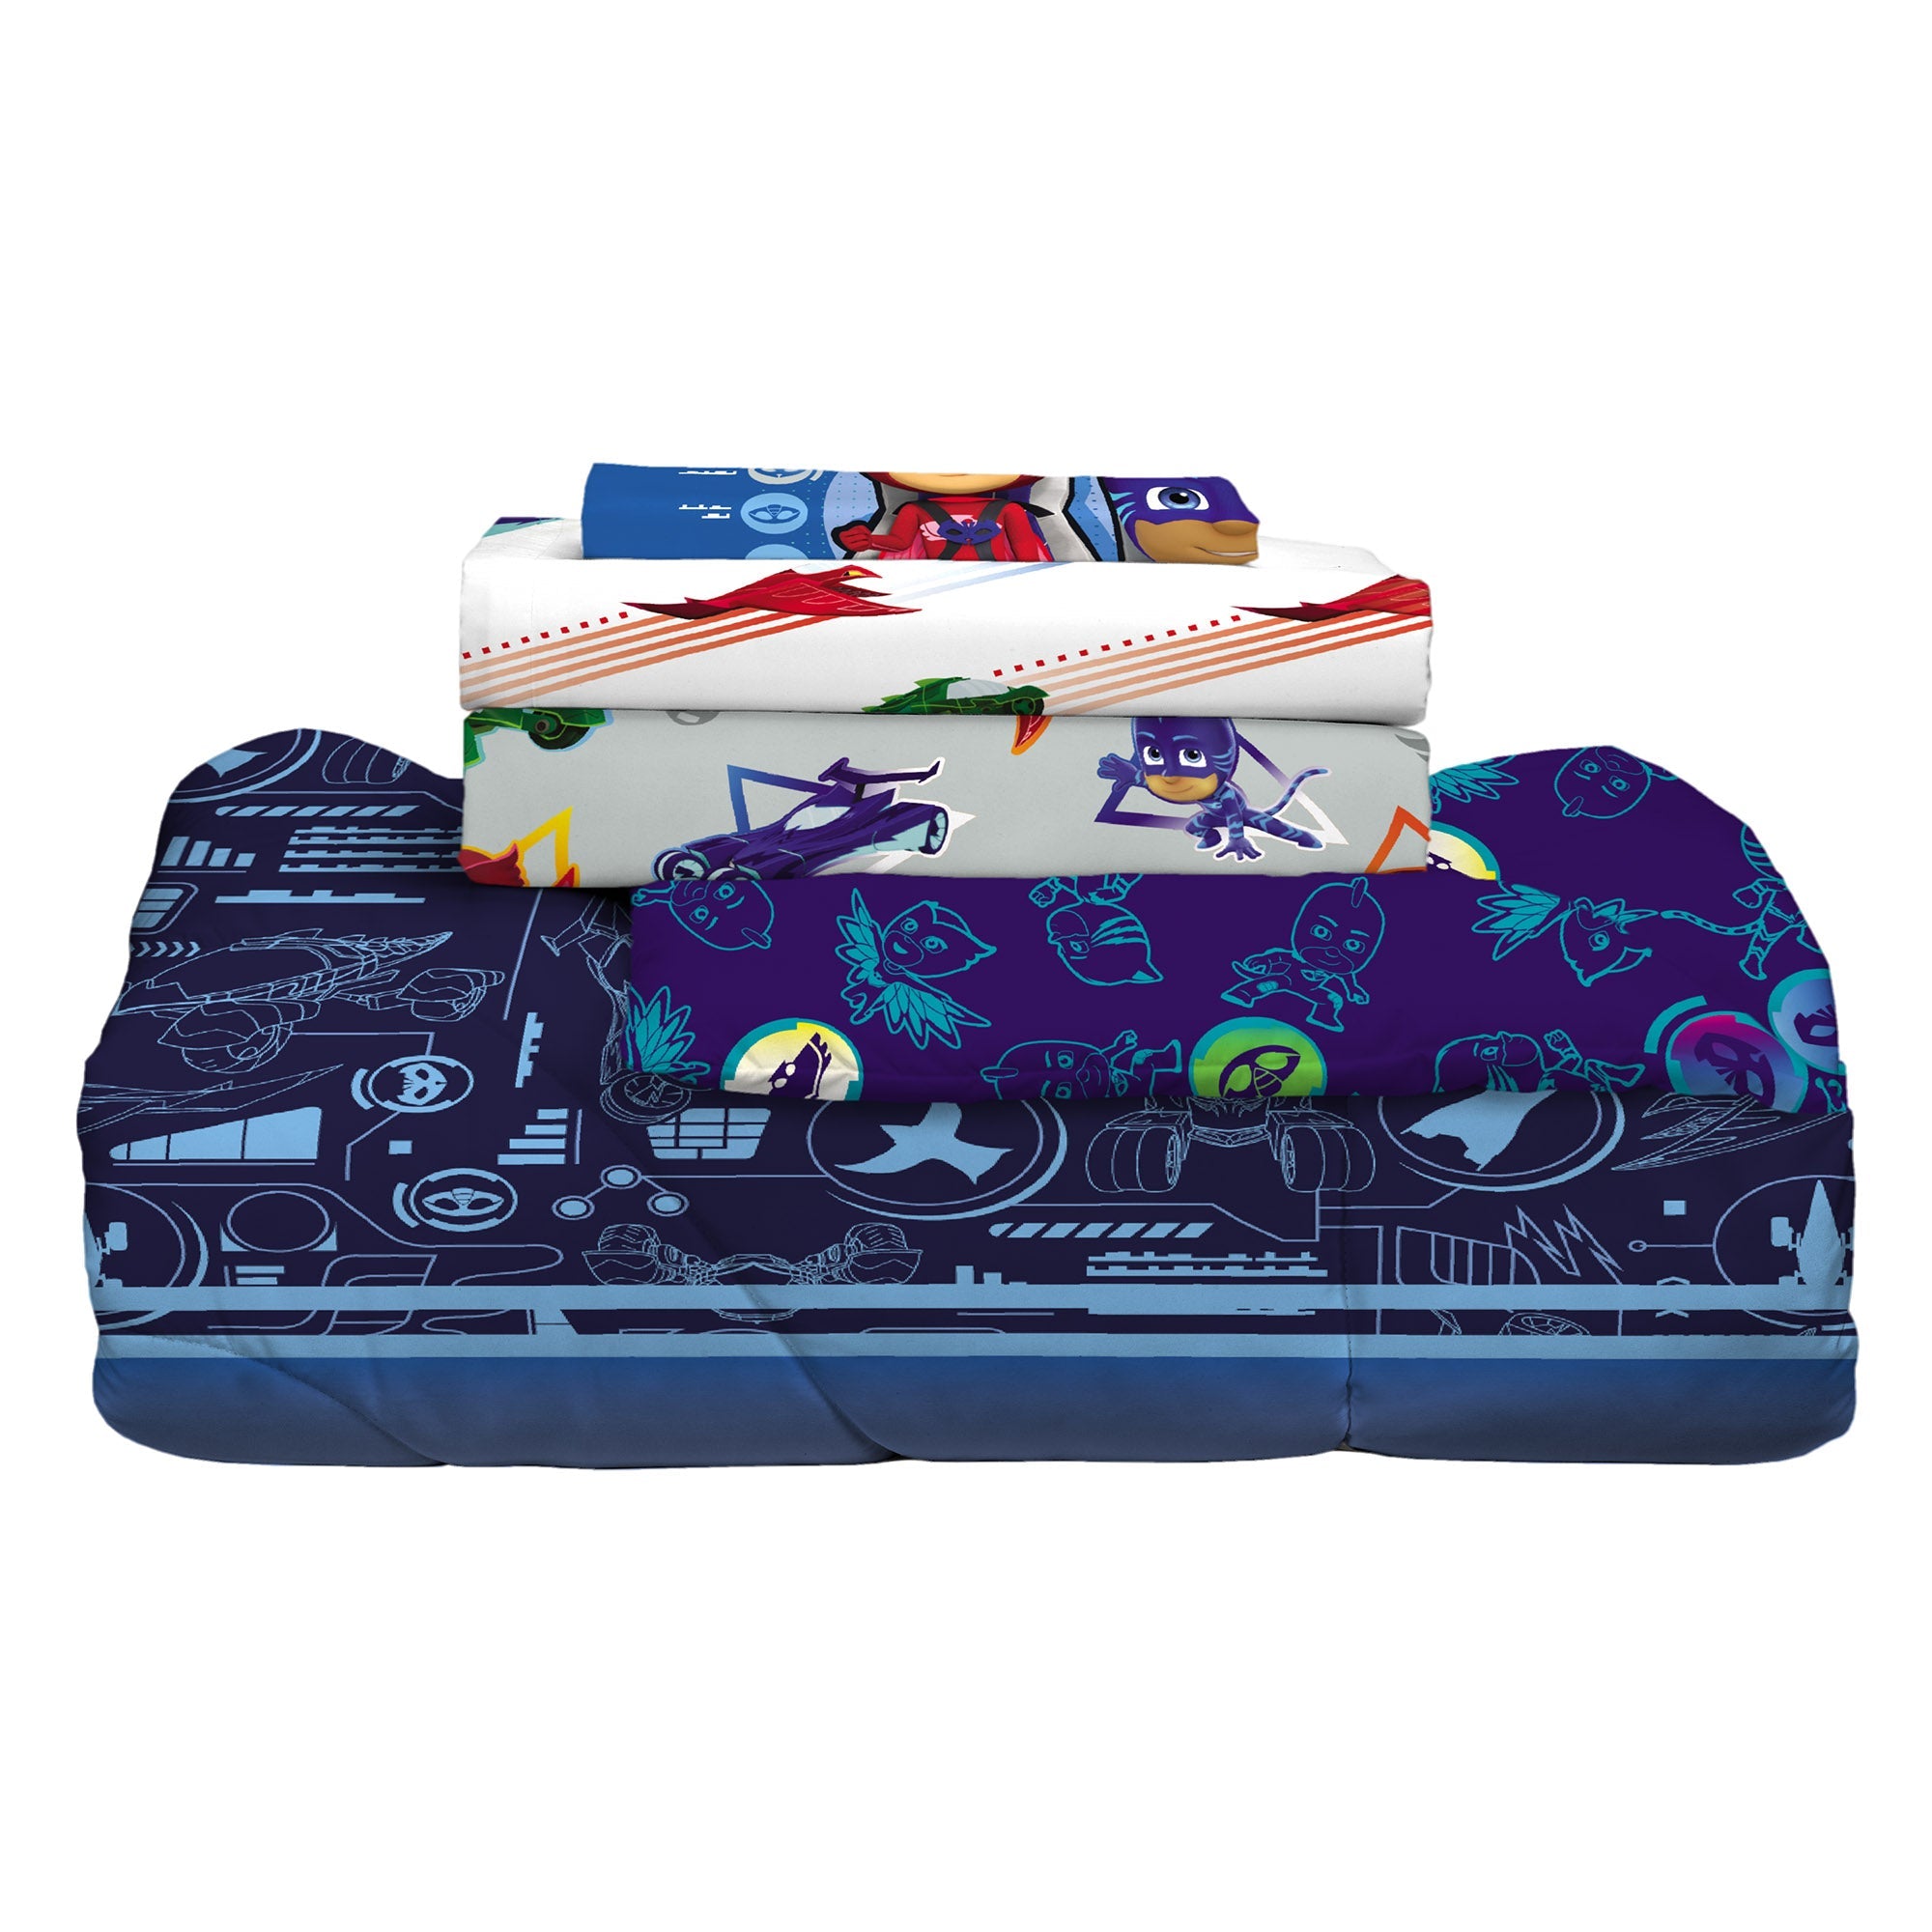 PJ Masks Kids Twin Bed in a Bag, Comforter and Sheets, Blue, Hasbro